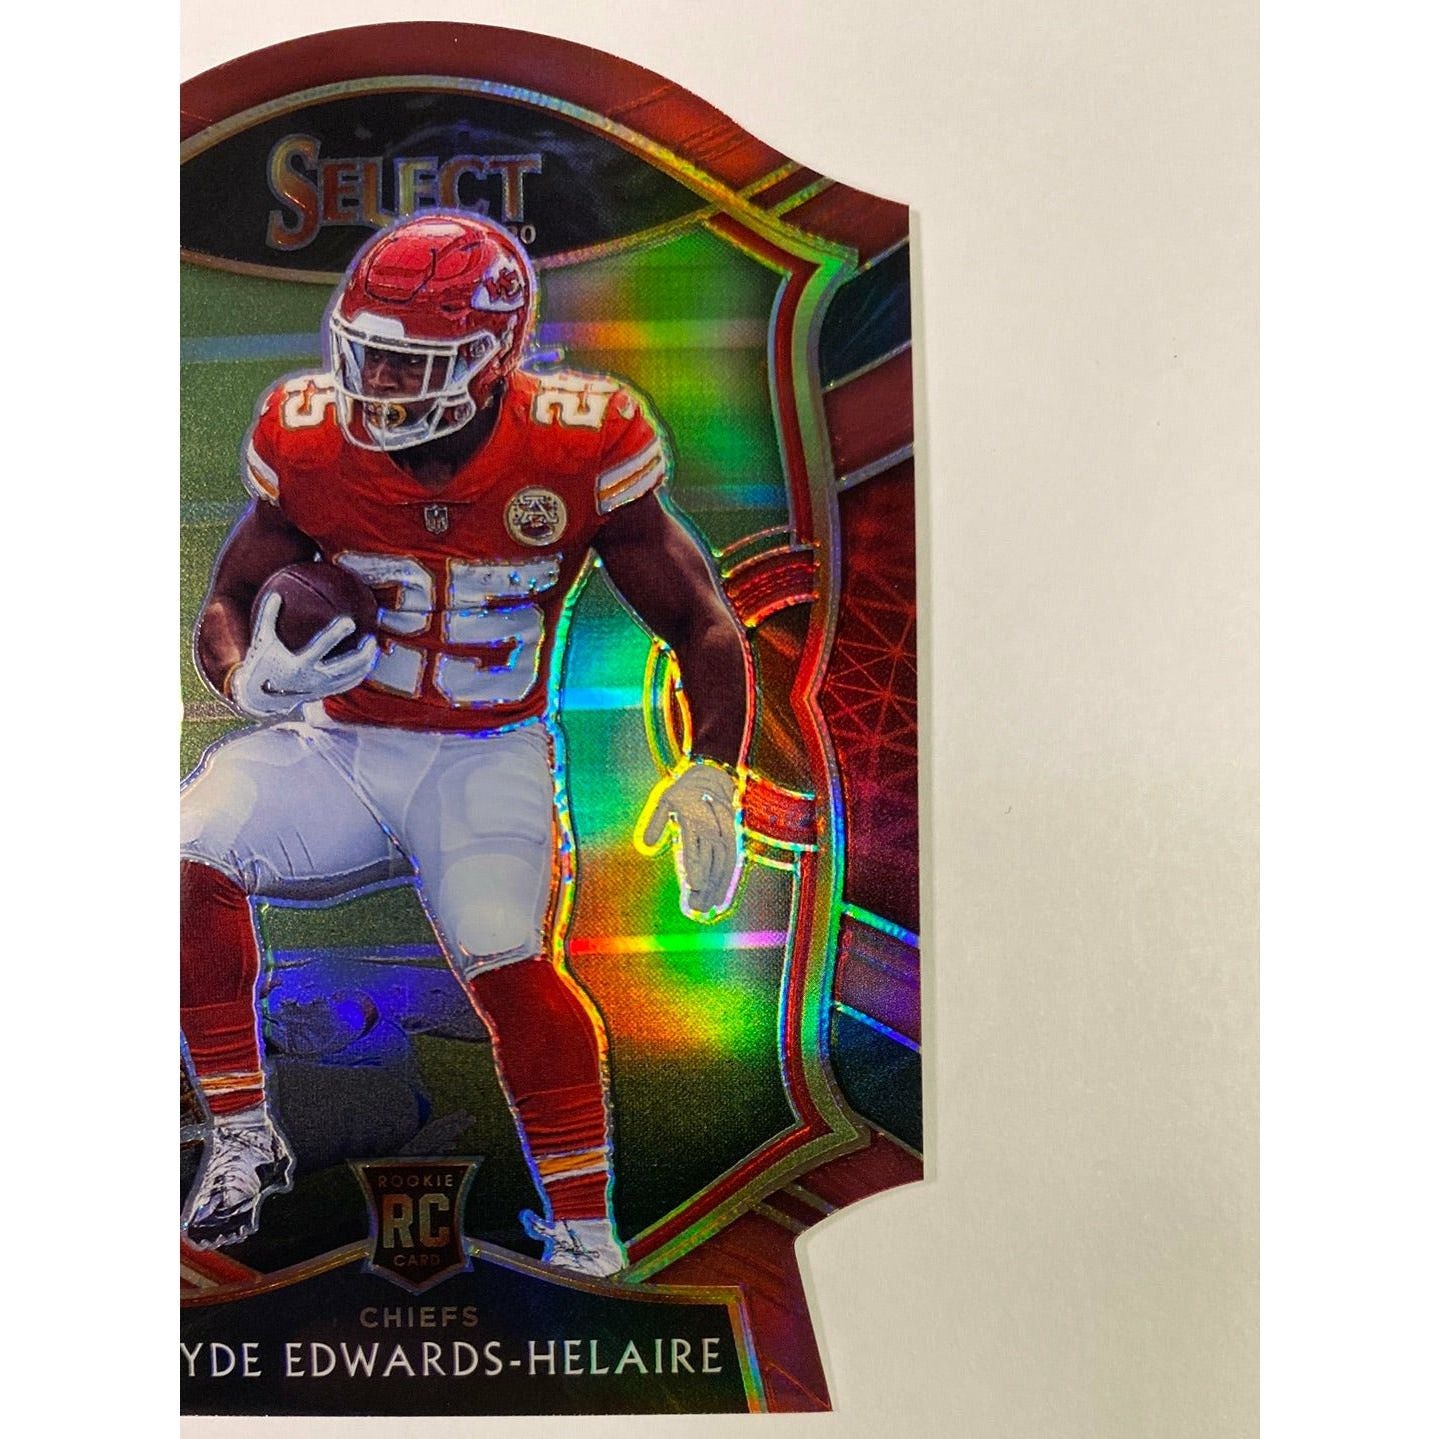  2020 Select Clyde Edwards-Helaire Concourse Level Maroon Die Cut Silver Holo Prizm  Local Legends Cards & Collectibles